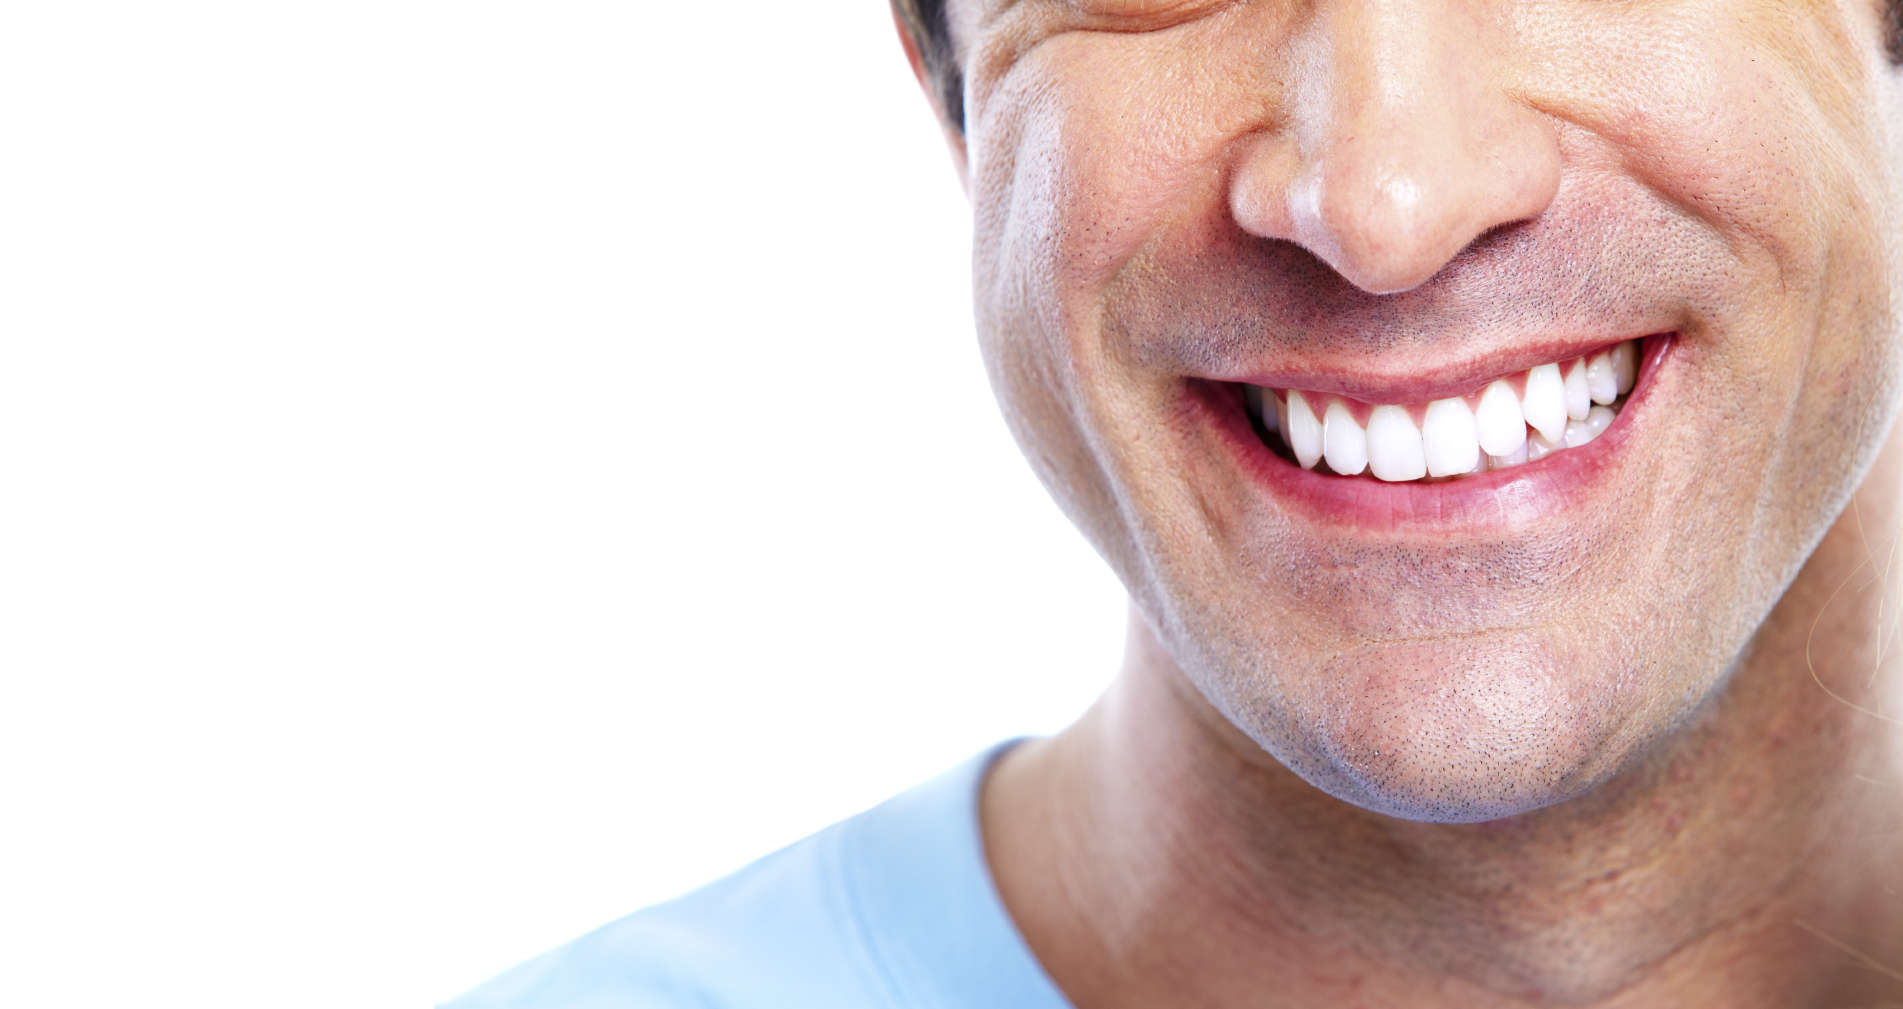 Is Teeth Whitening Safe for You and Your Family?